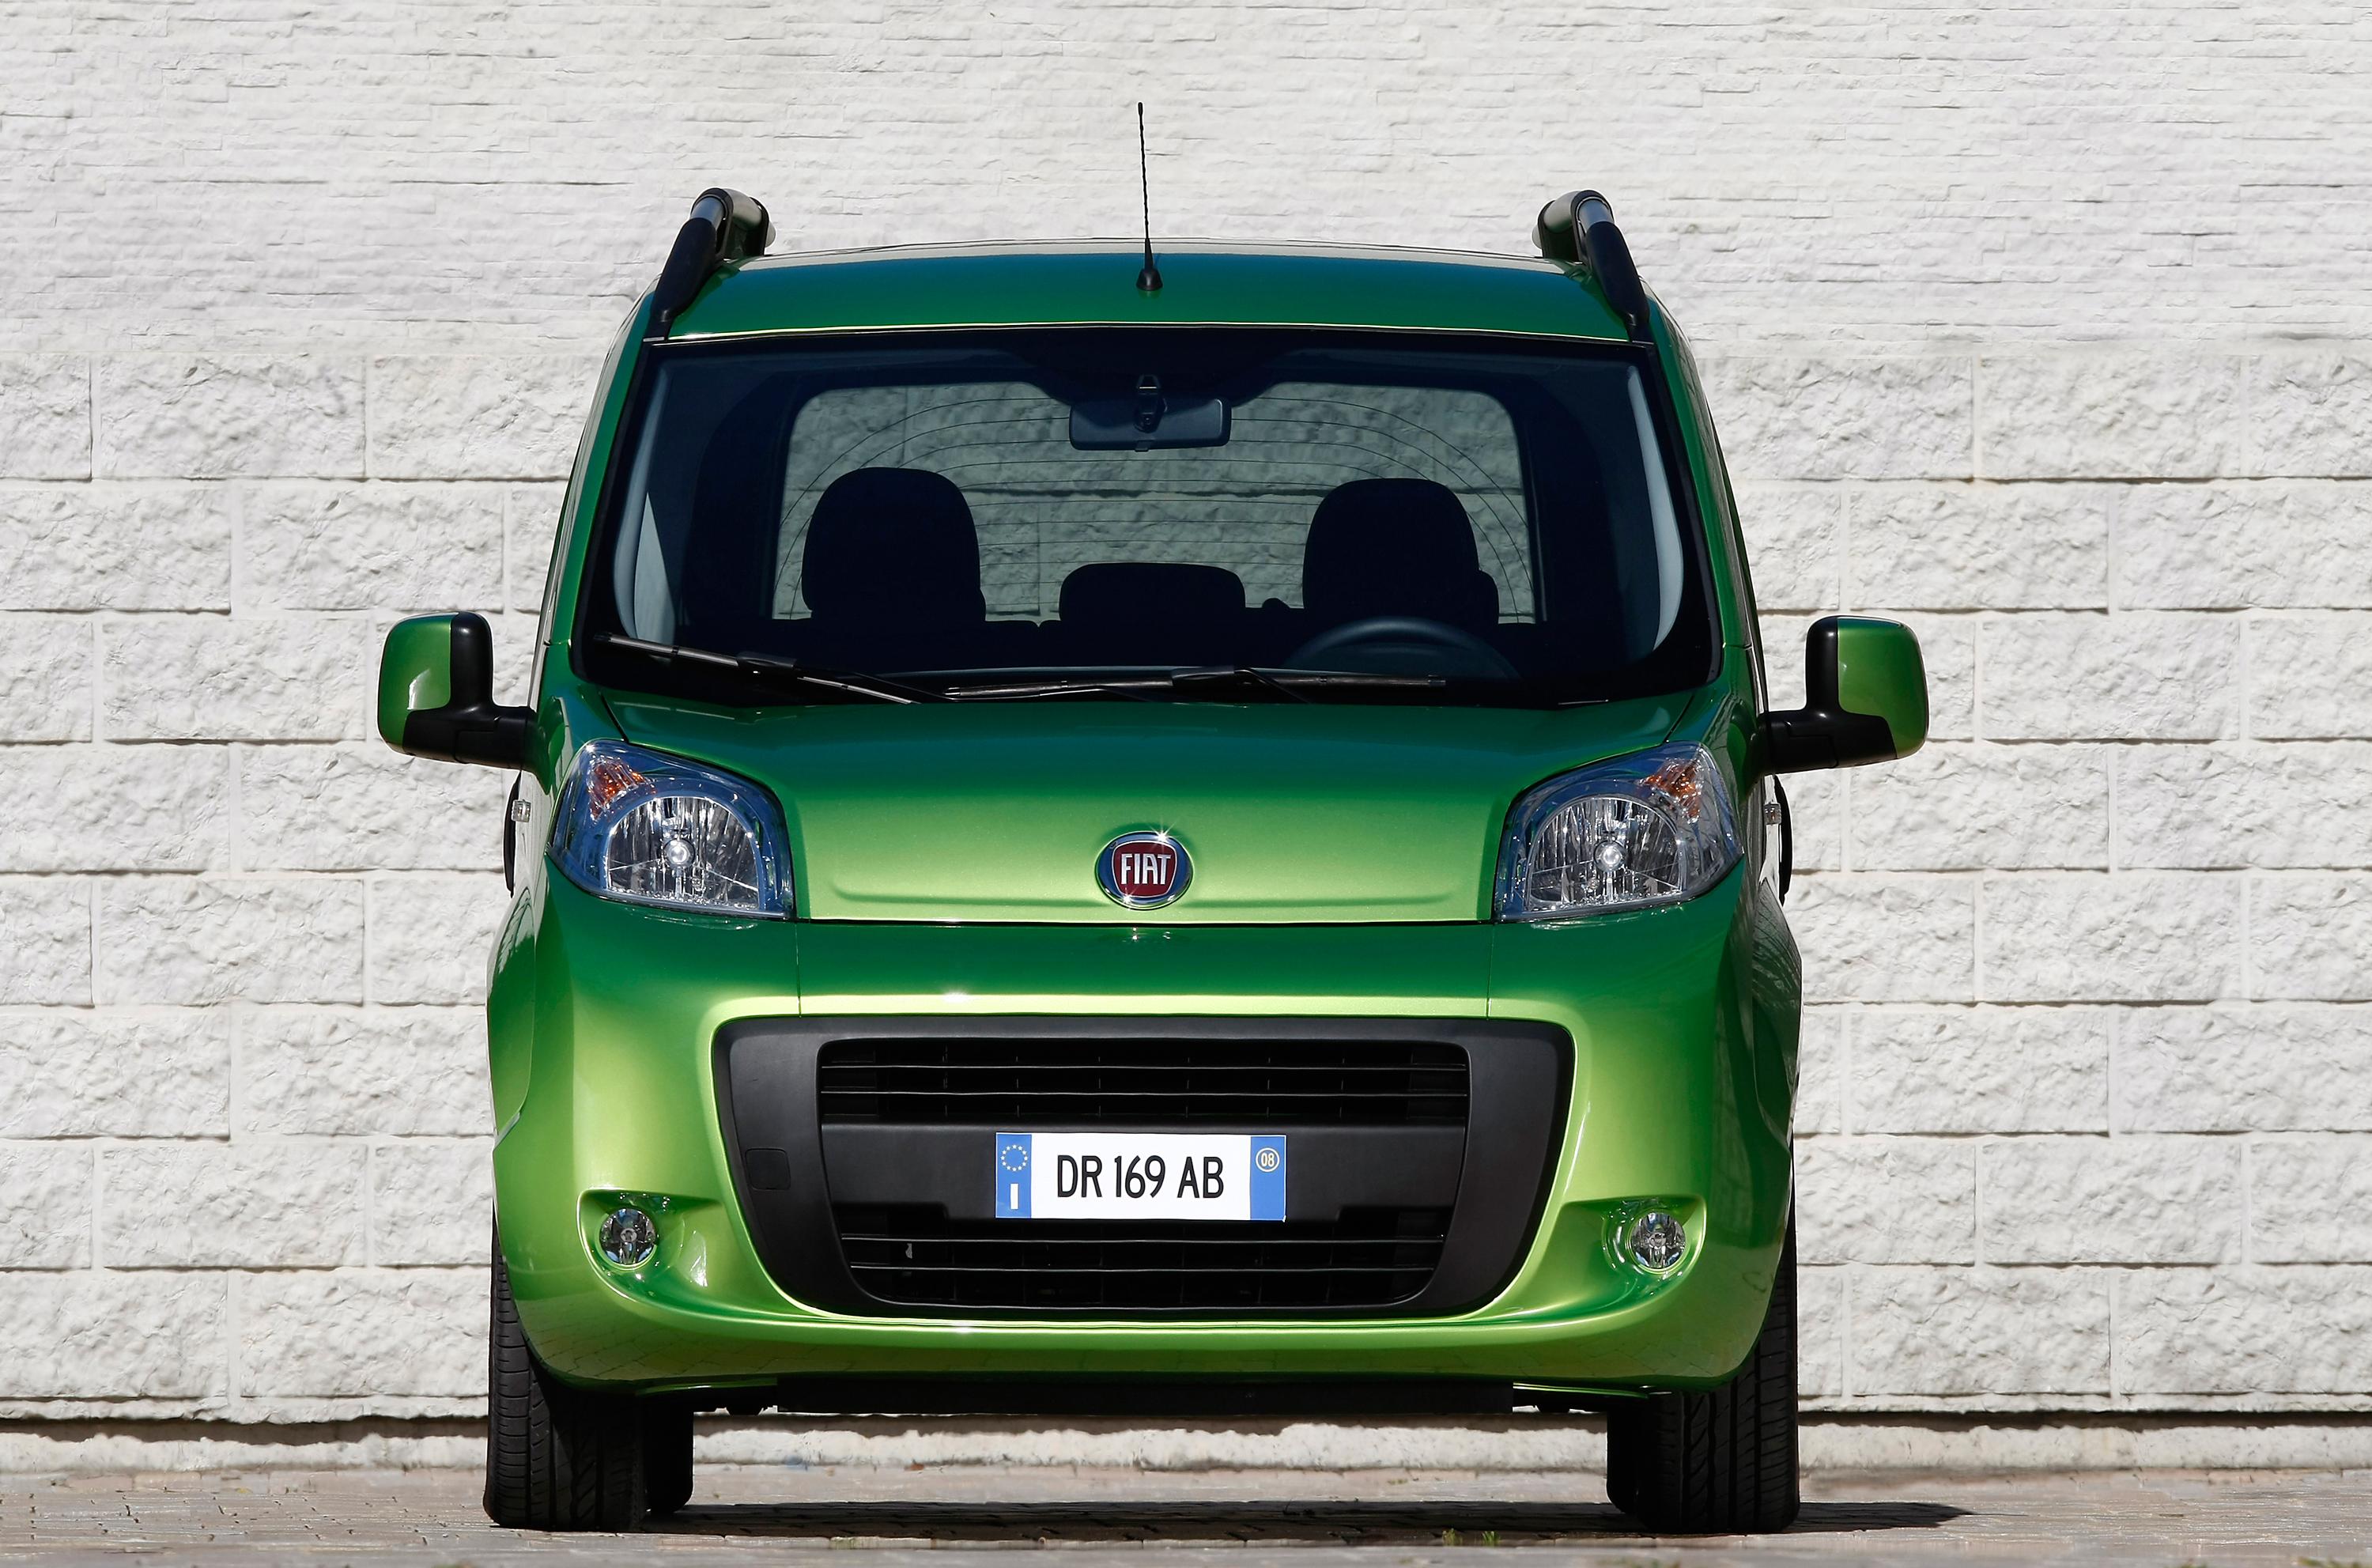 Fiat Qubo Wallpapers